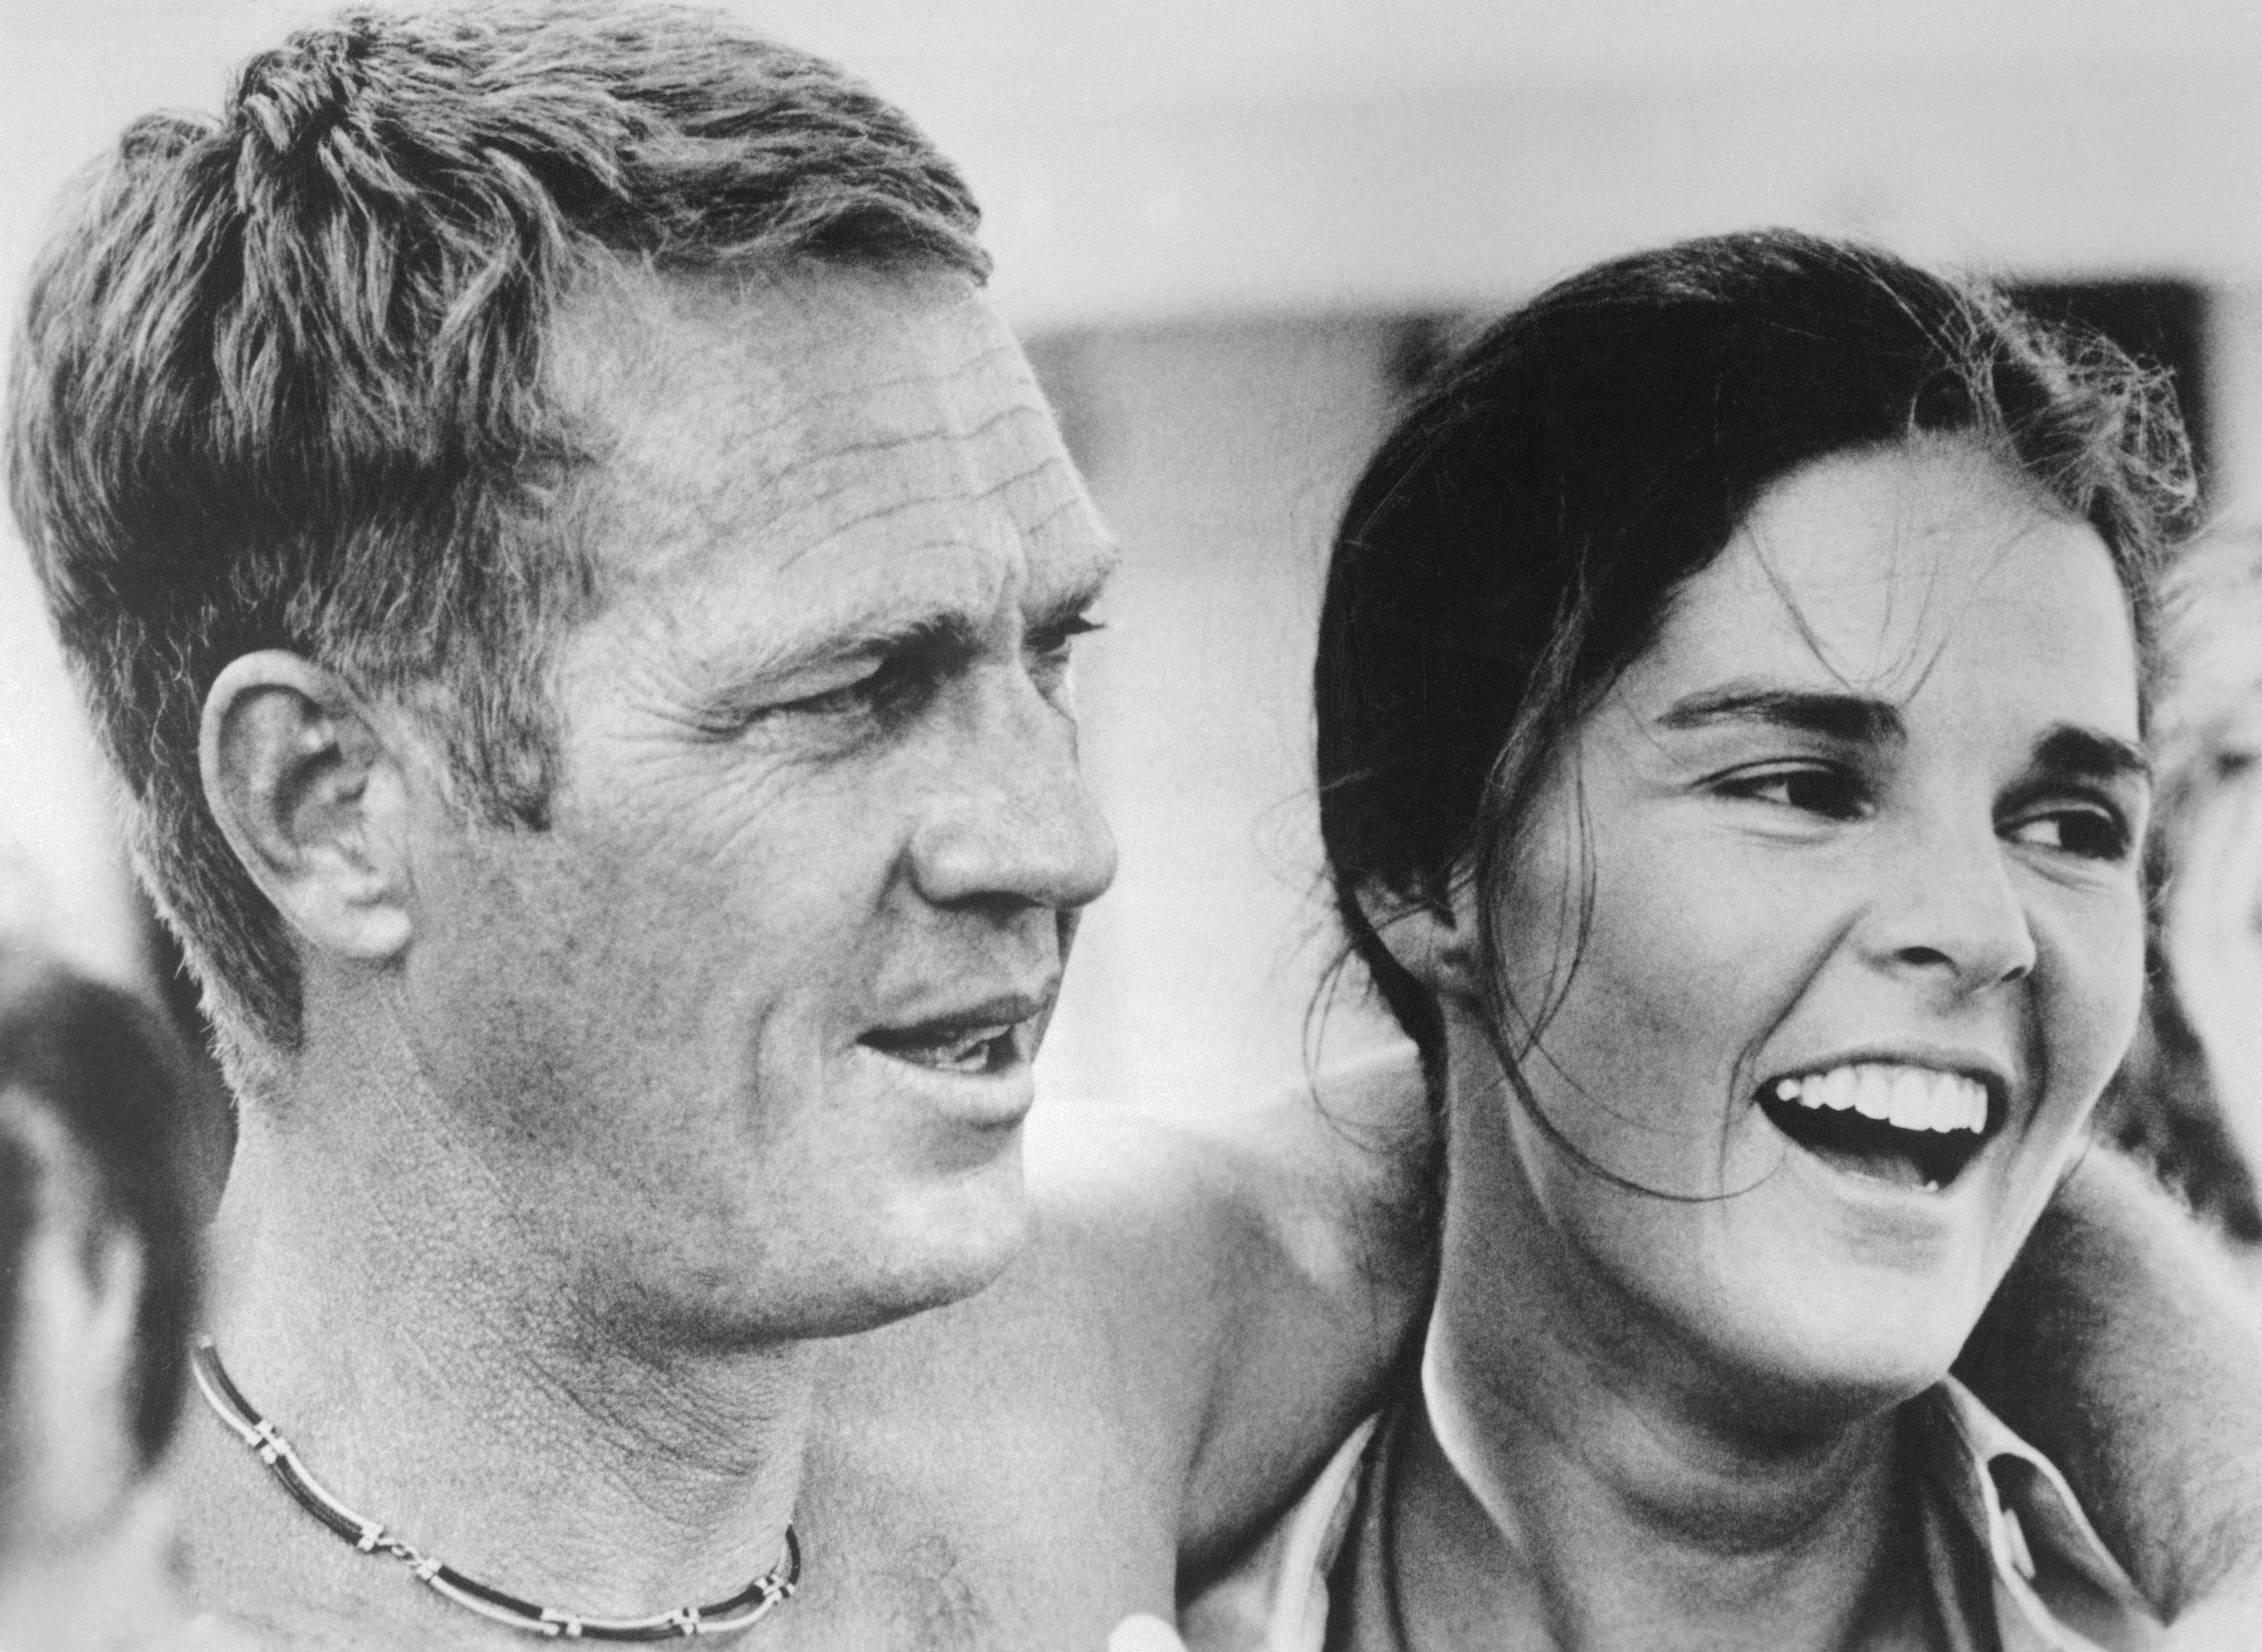 Steve McQueen and Ali McGraw in a scene from the 1972 movie "The Getaway." | Source: Bettmann/Getty Images